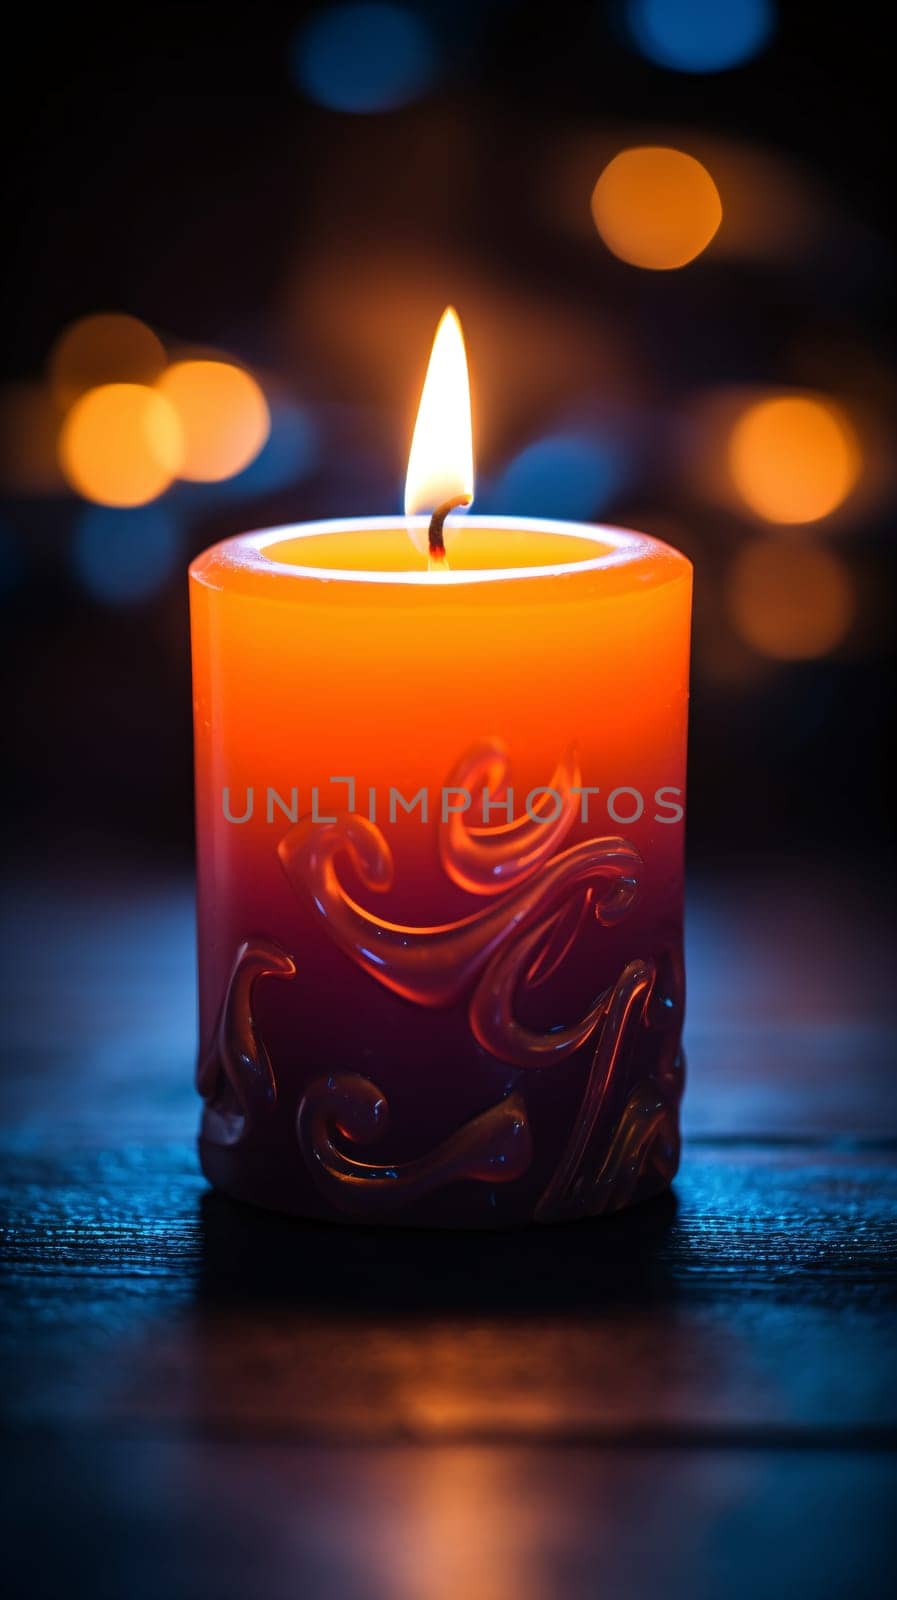 A lit decorated candle with a flame against blue background with defocused lights by chrisroll